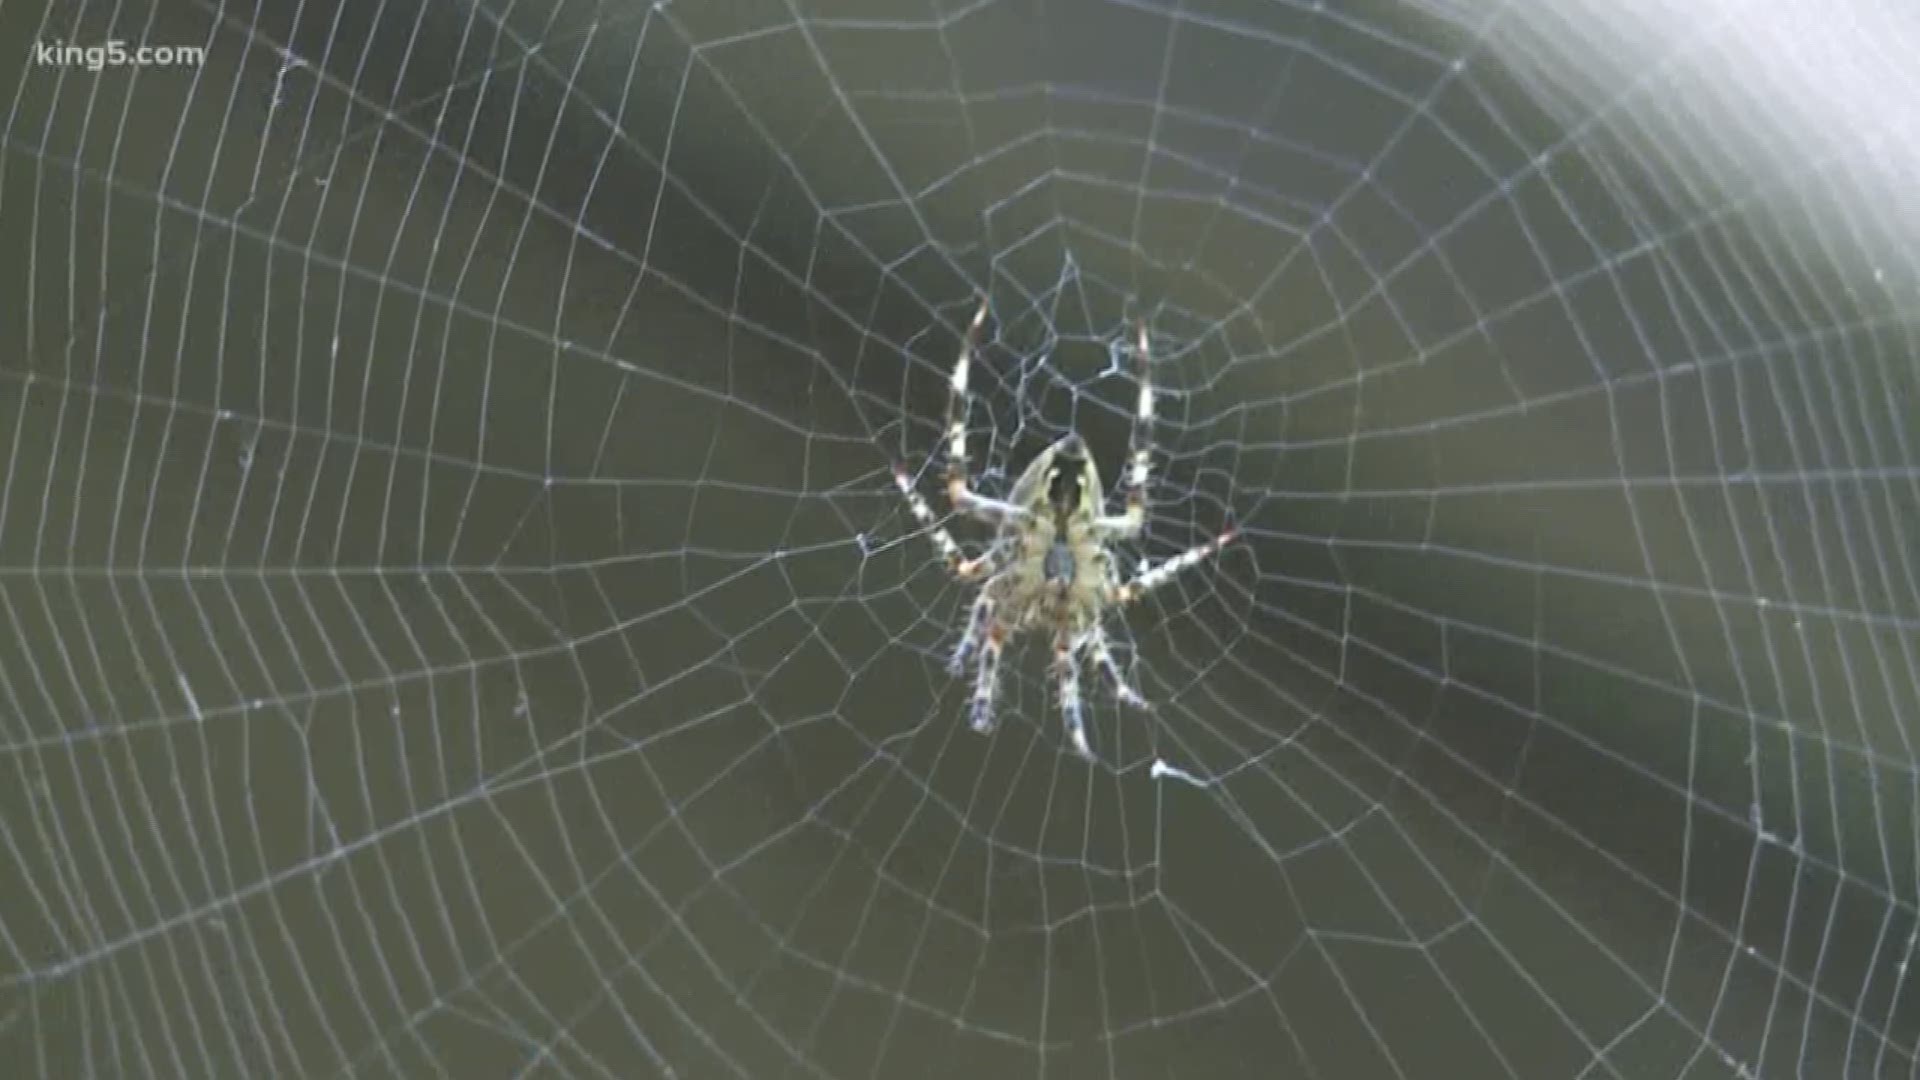 You may notice more spiders in and around your home this time of year and experts say it's totally normal. Those spiders are just looking for a mate.